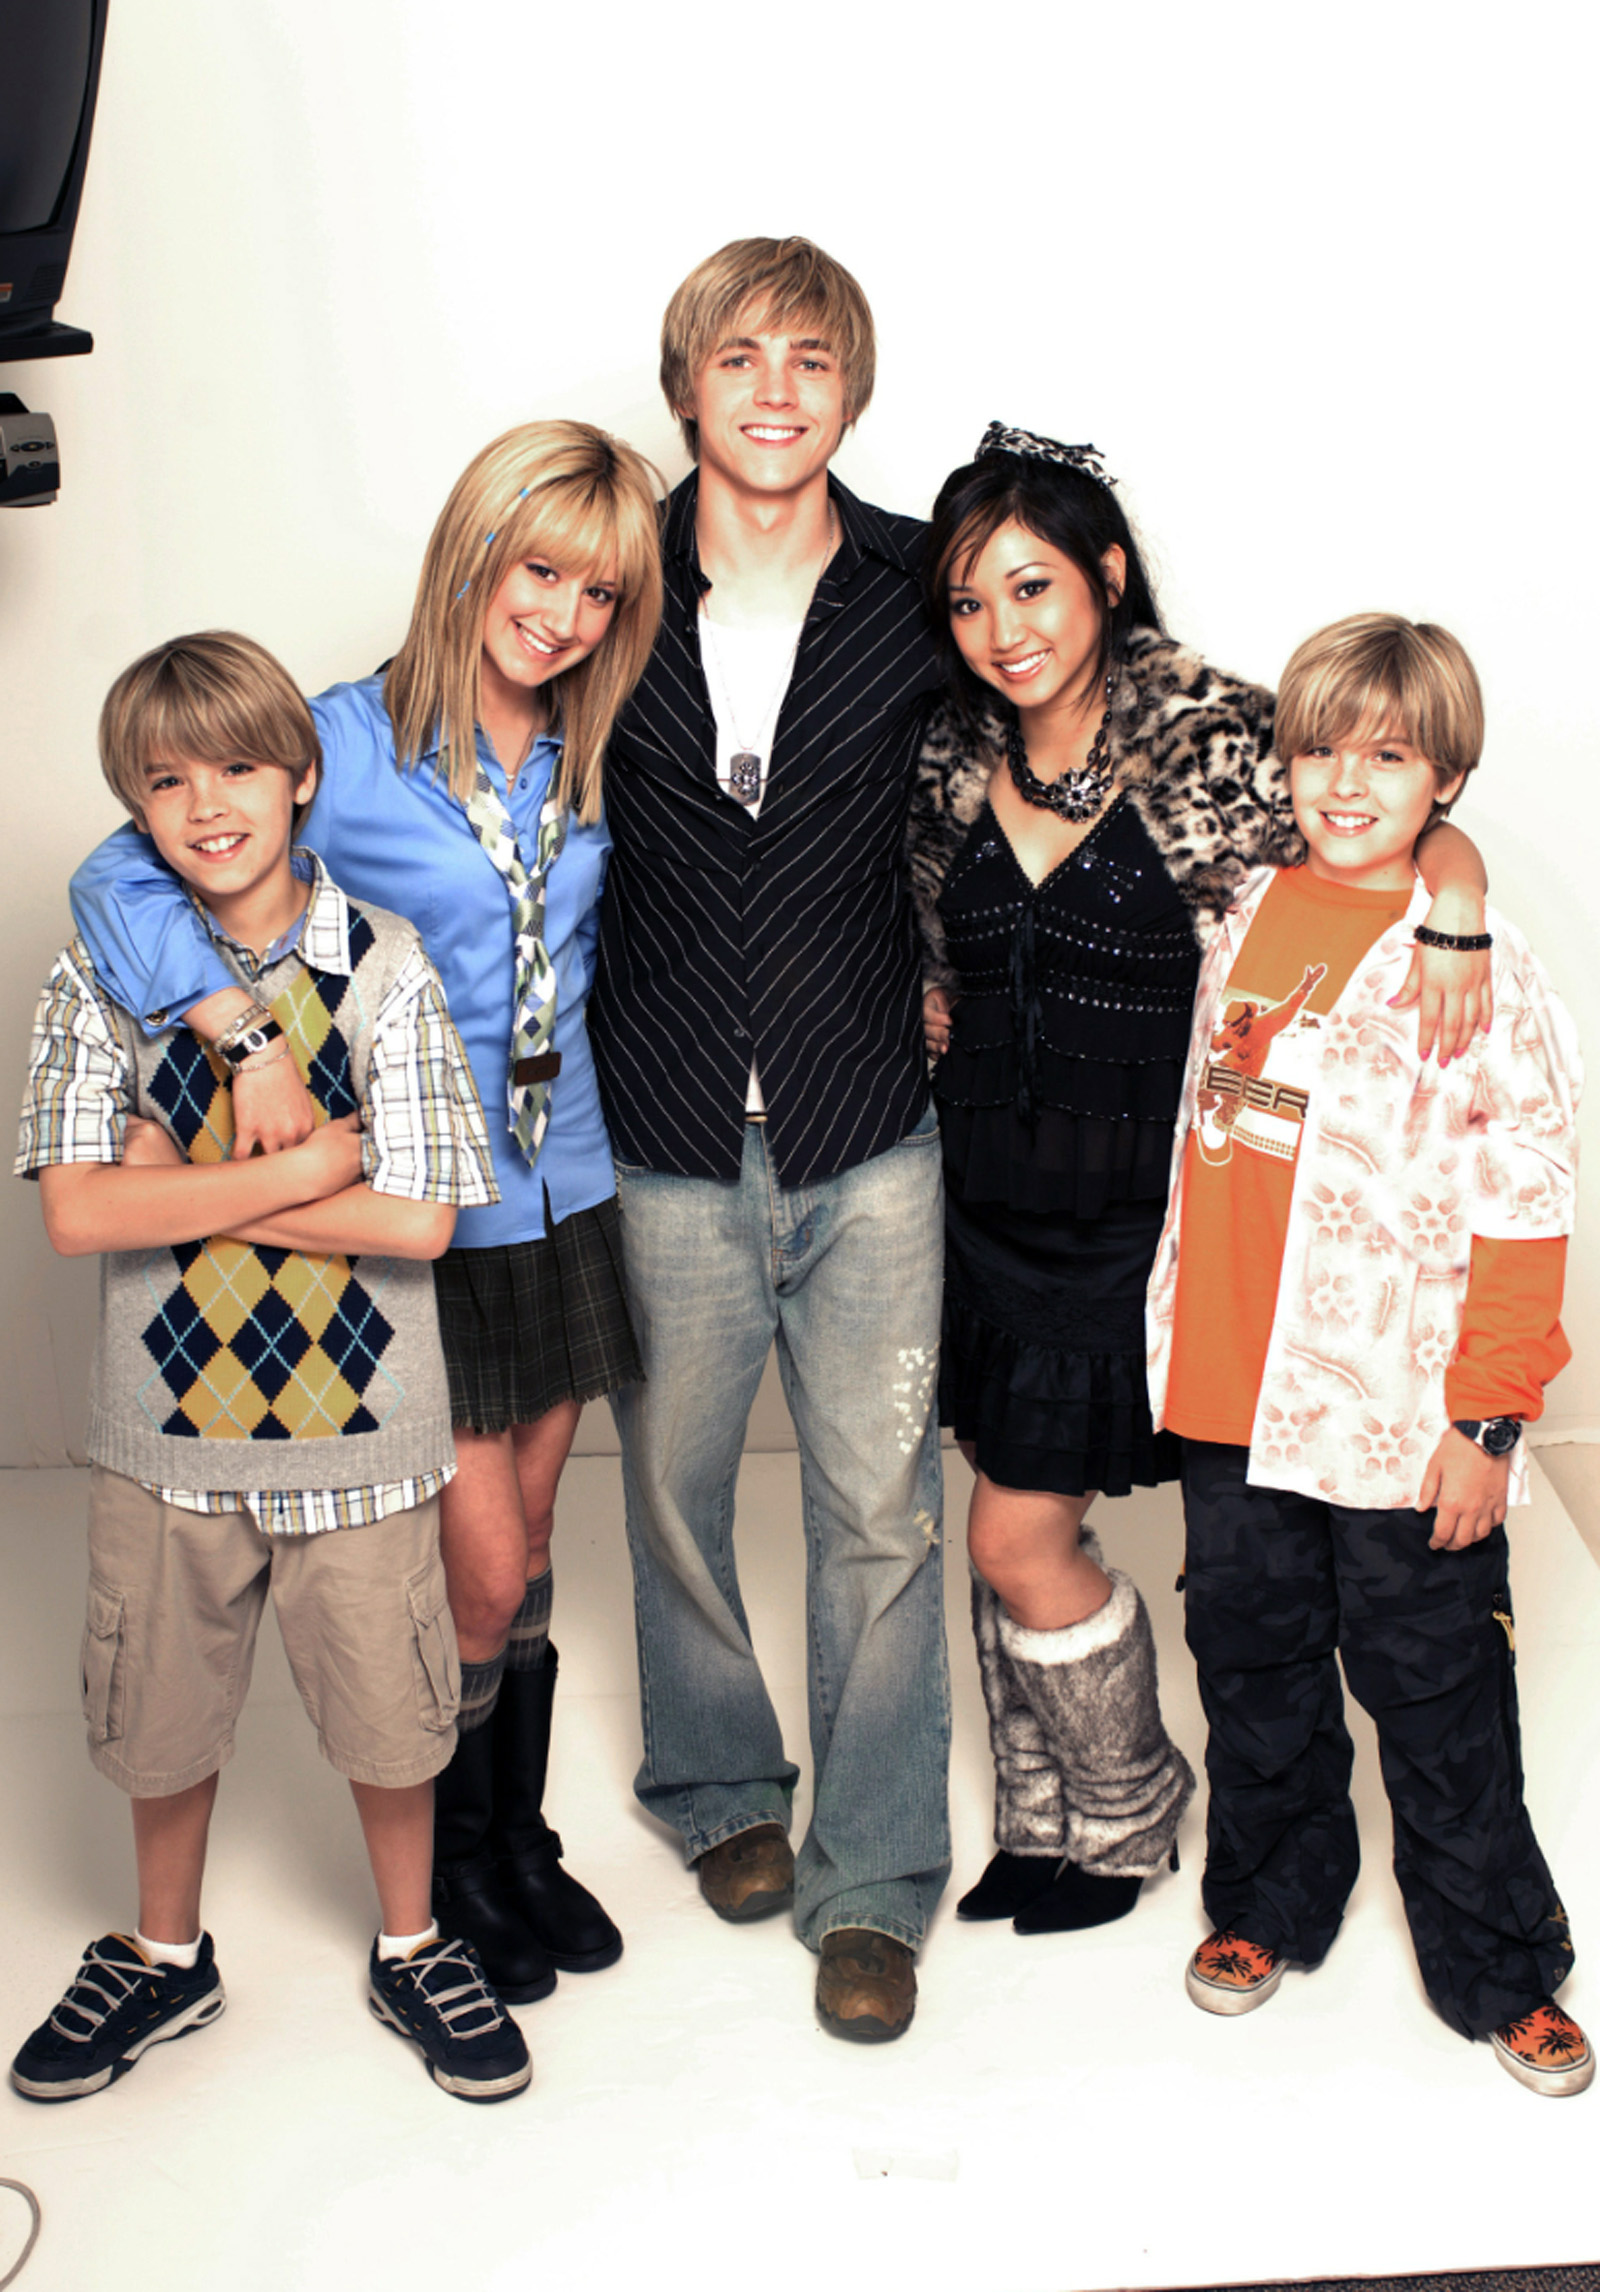 Dylan Sprouse in The Suite Life of Zack and Cody (Season 1)